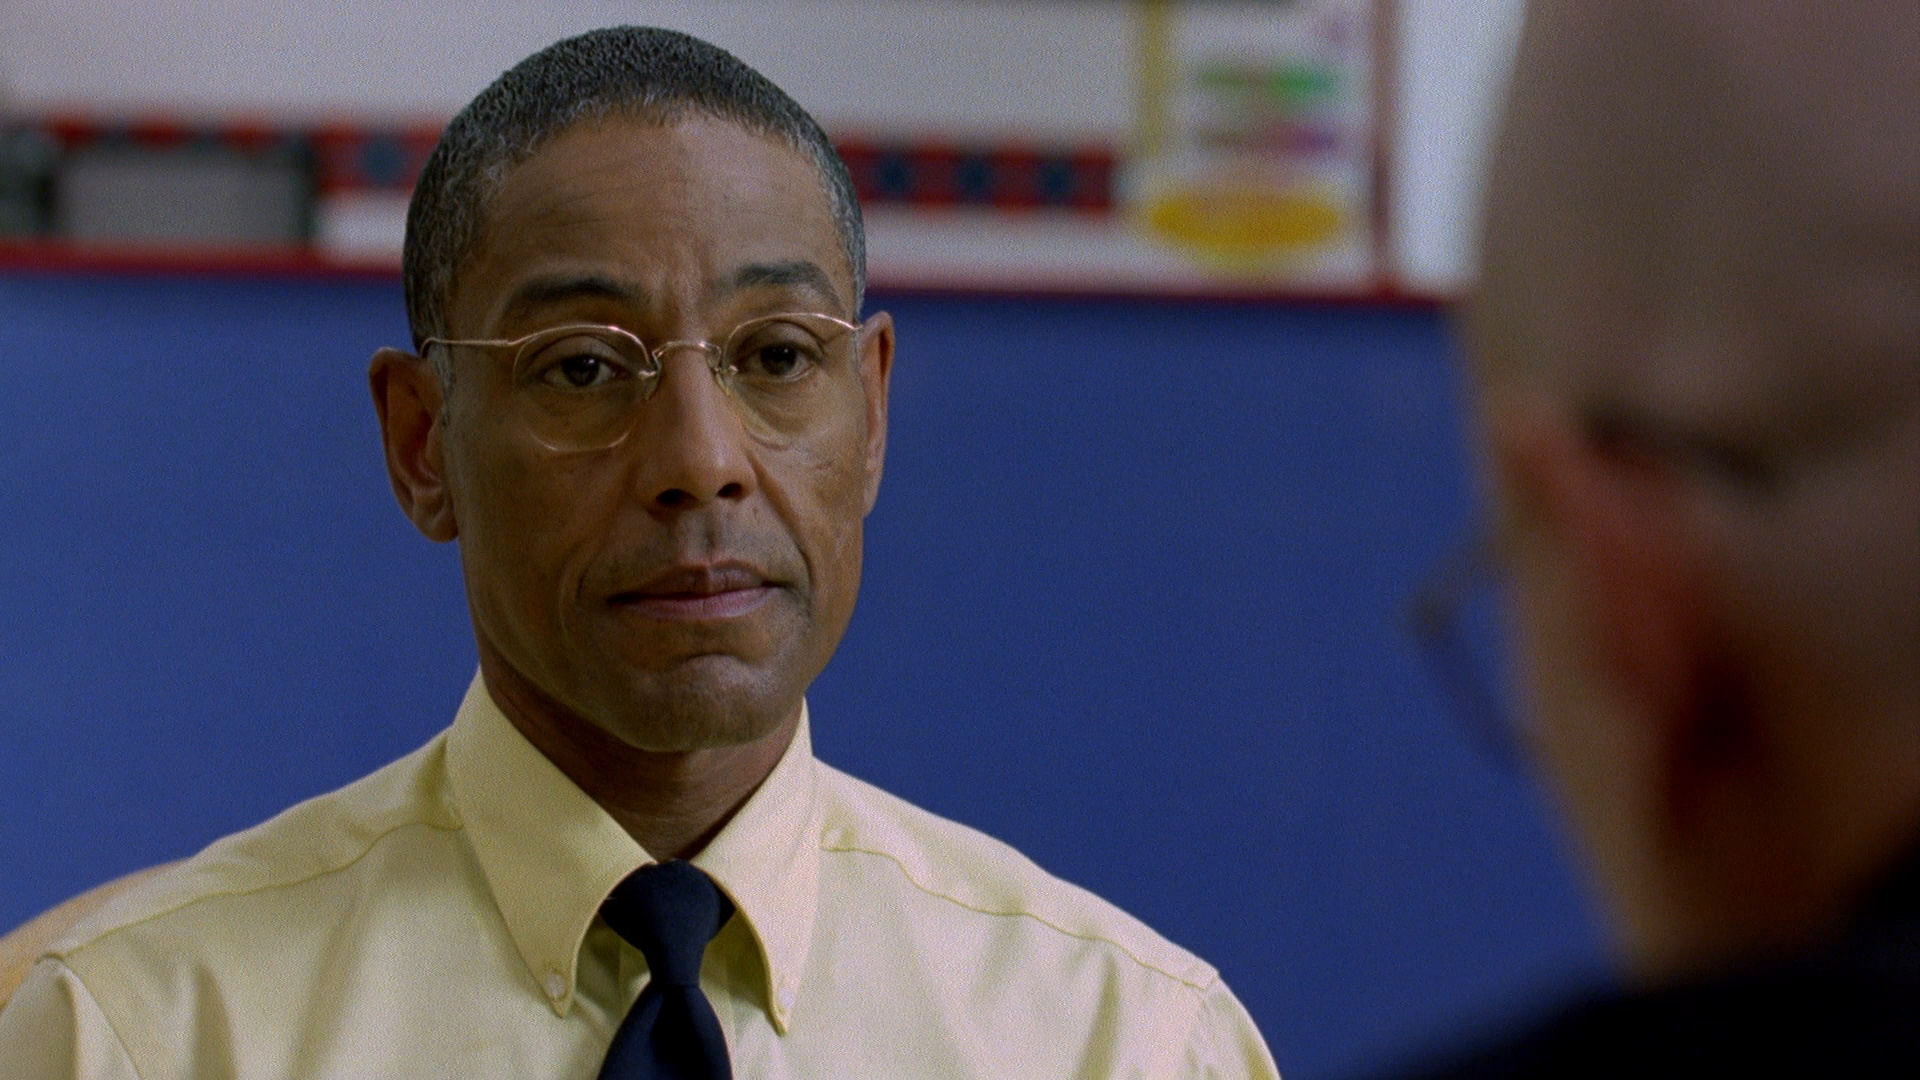 Giancarlo Esposito: Gus Fring talking to Walter White, Breaking Bad television series created by Vince Gilligan. 1920x1080 Full HD Background.